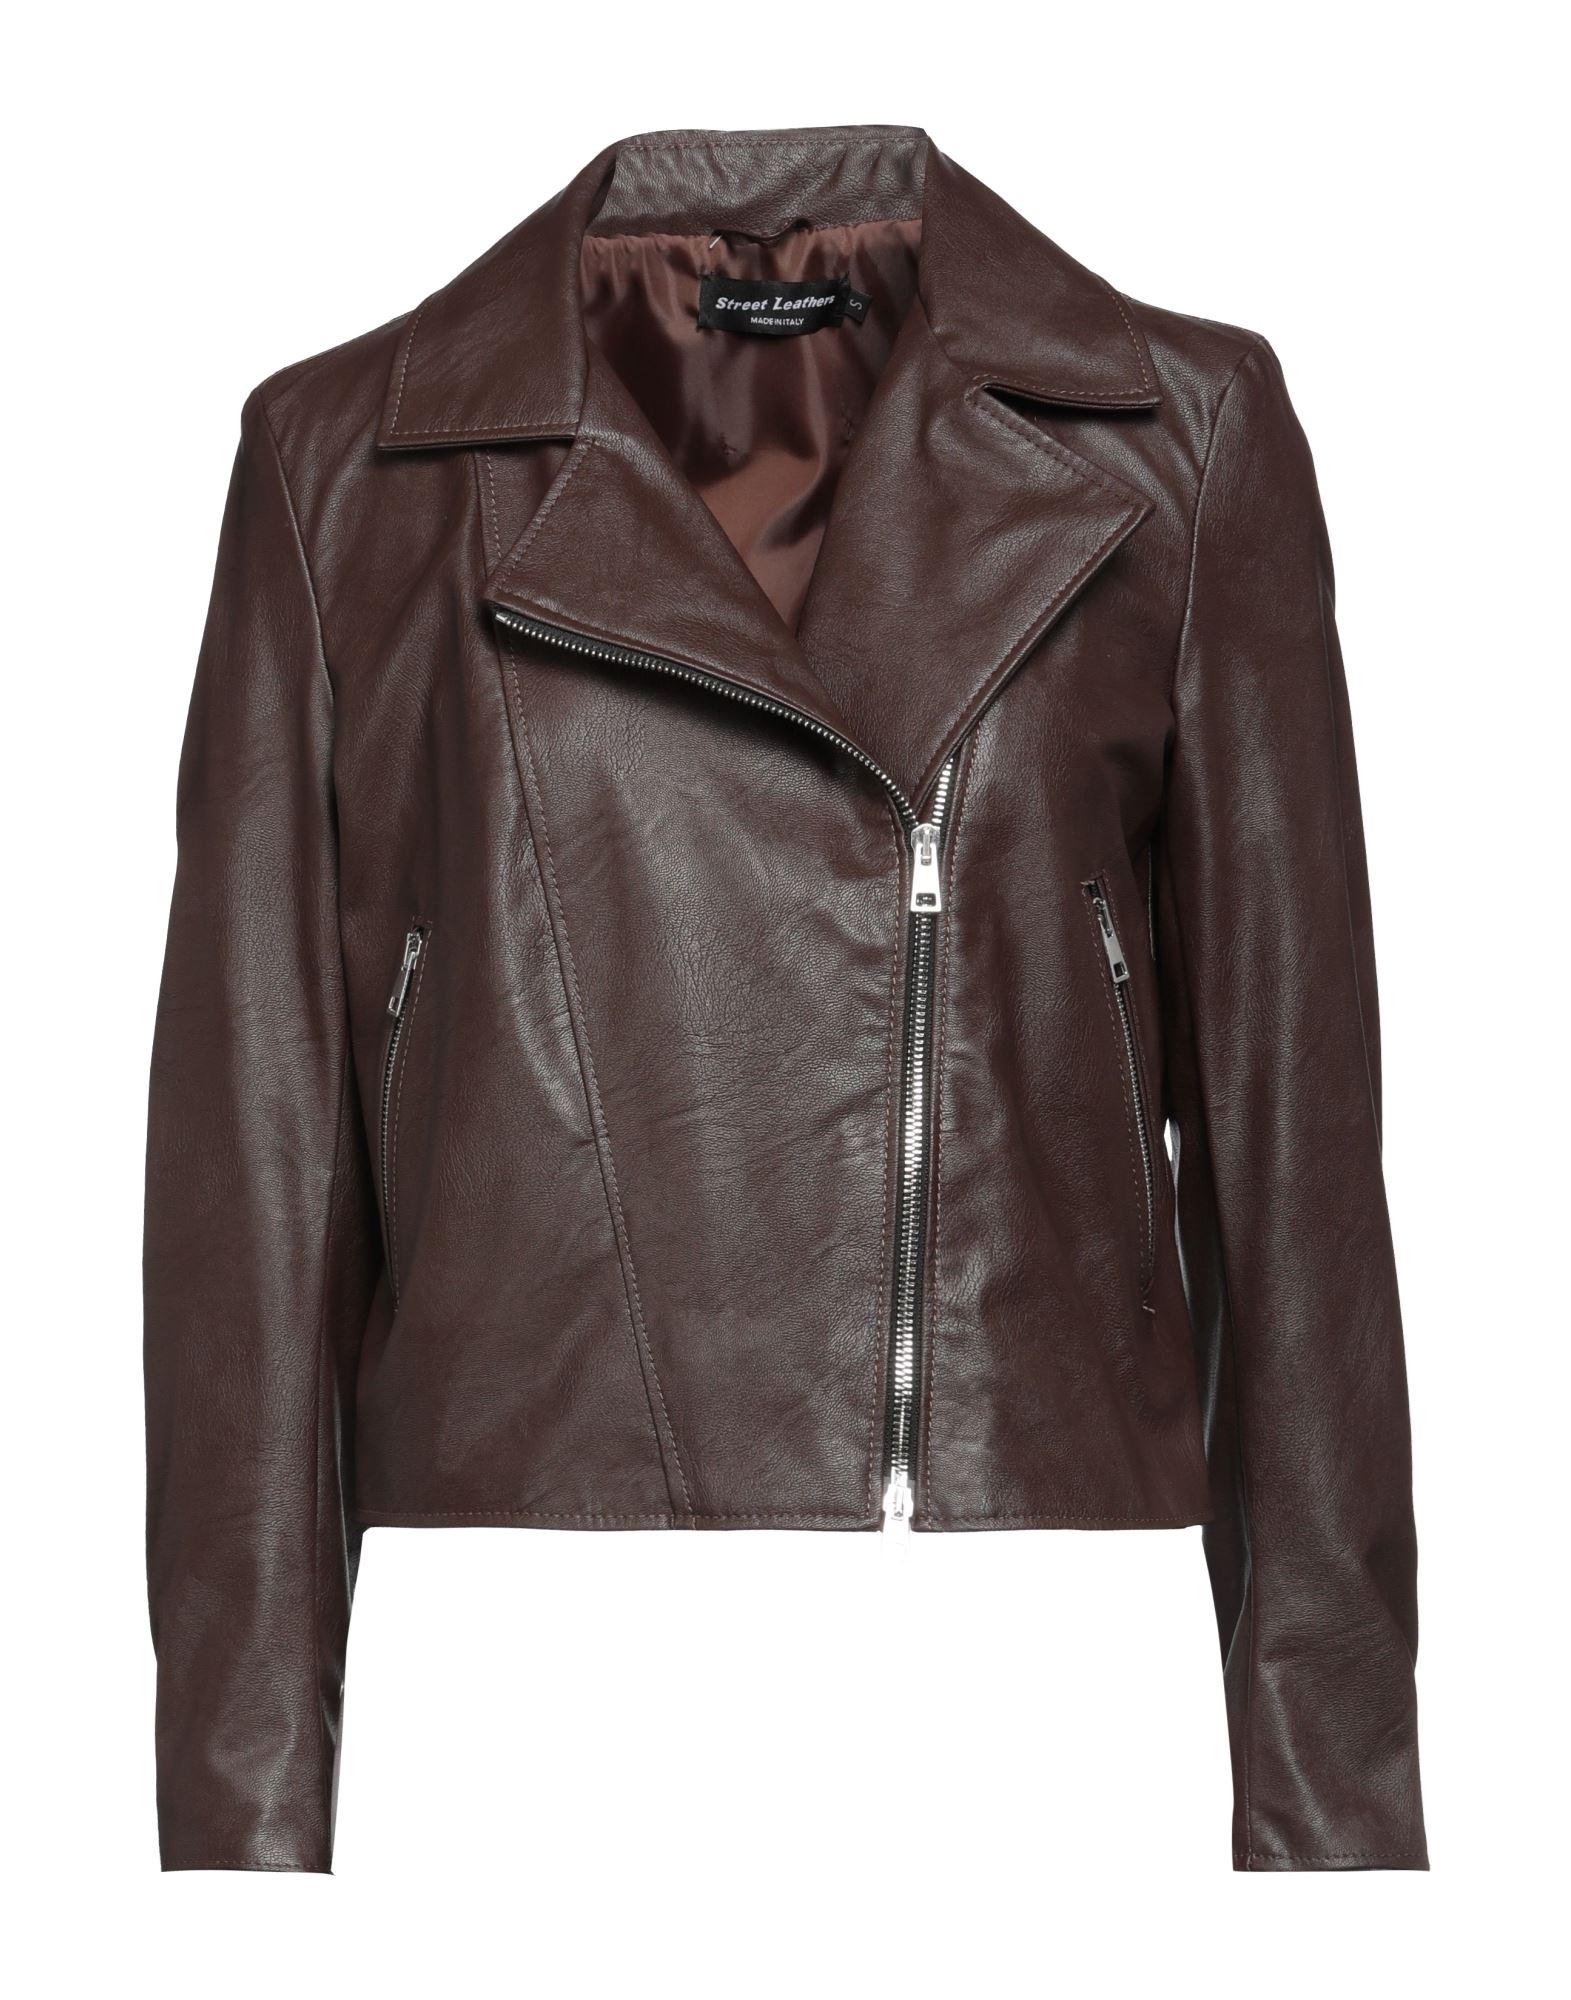 Street Leathers Jackets In Brown